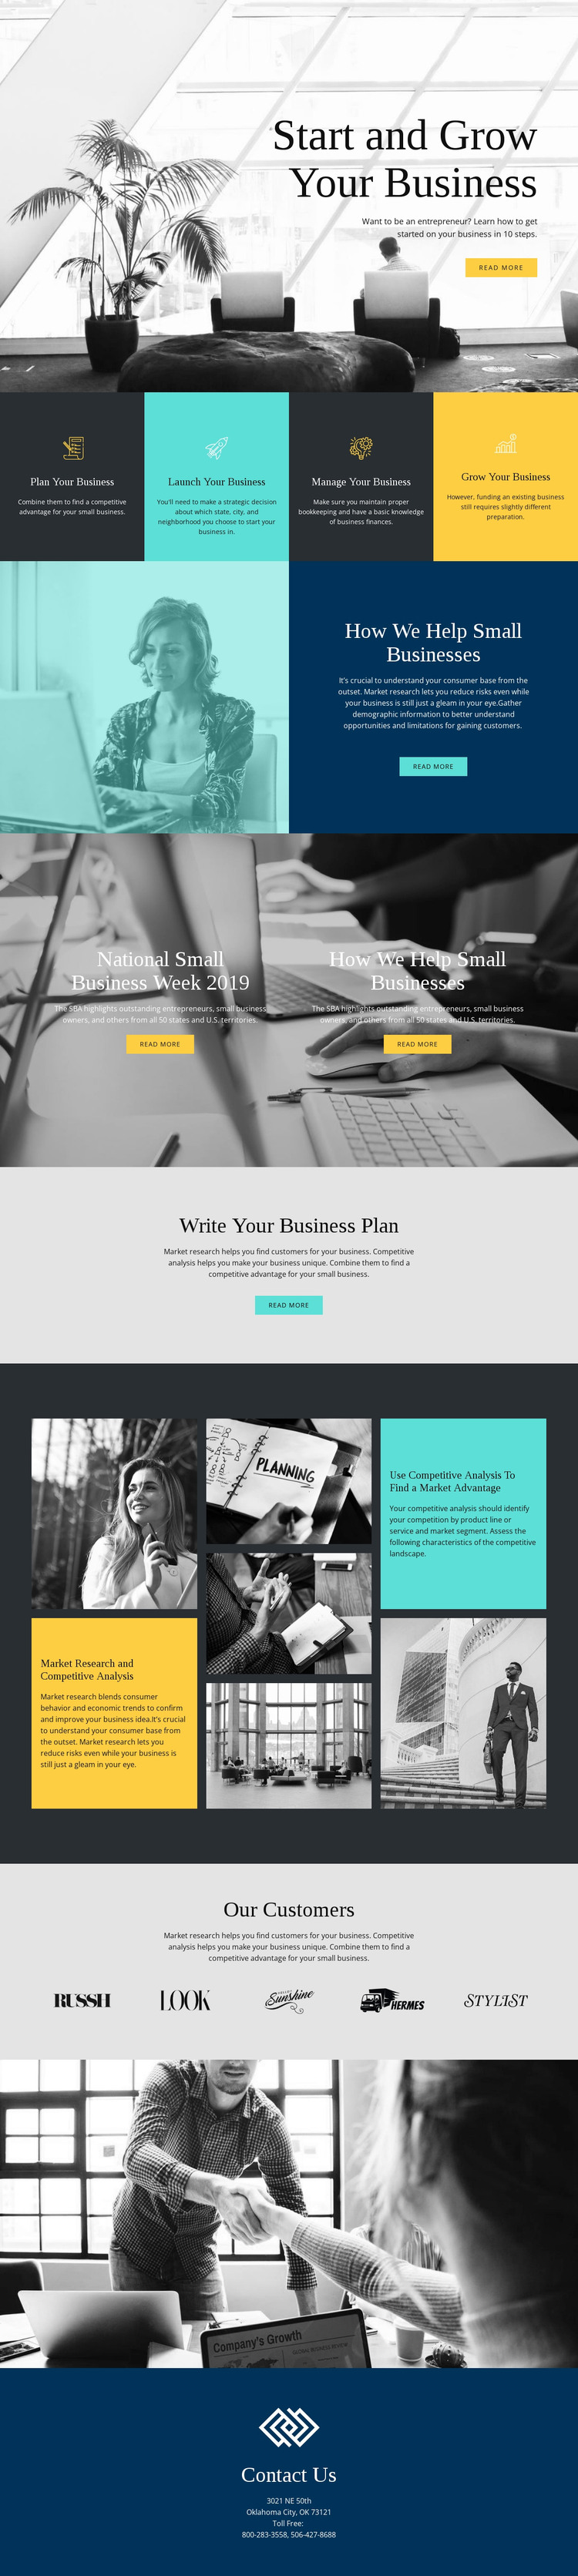 Start and grow your business WordPress Theme